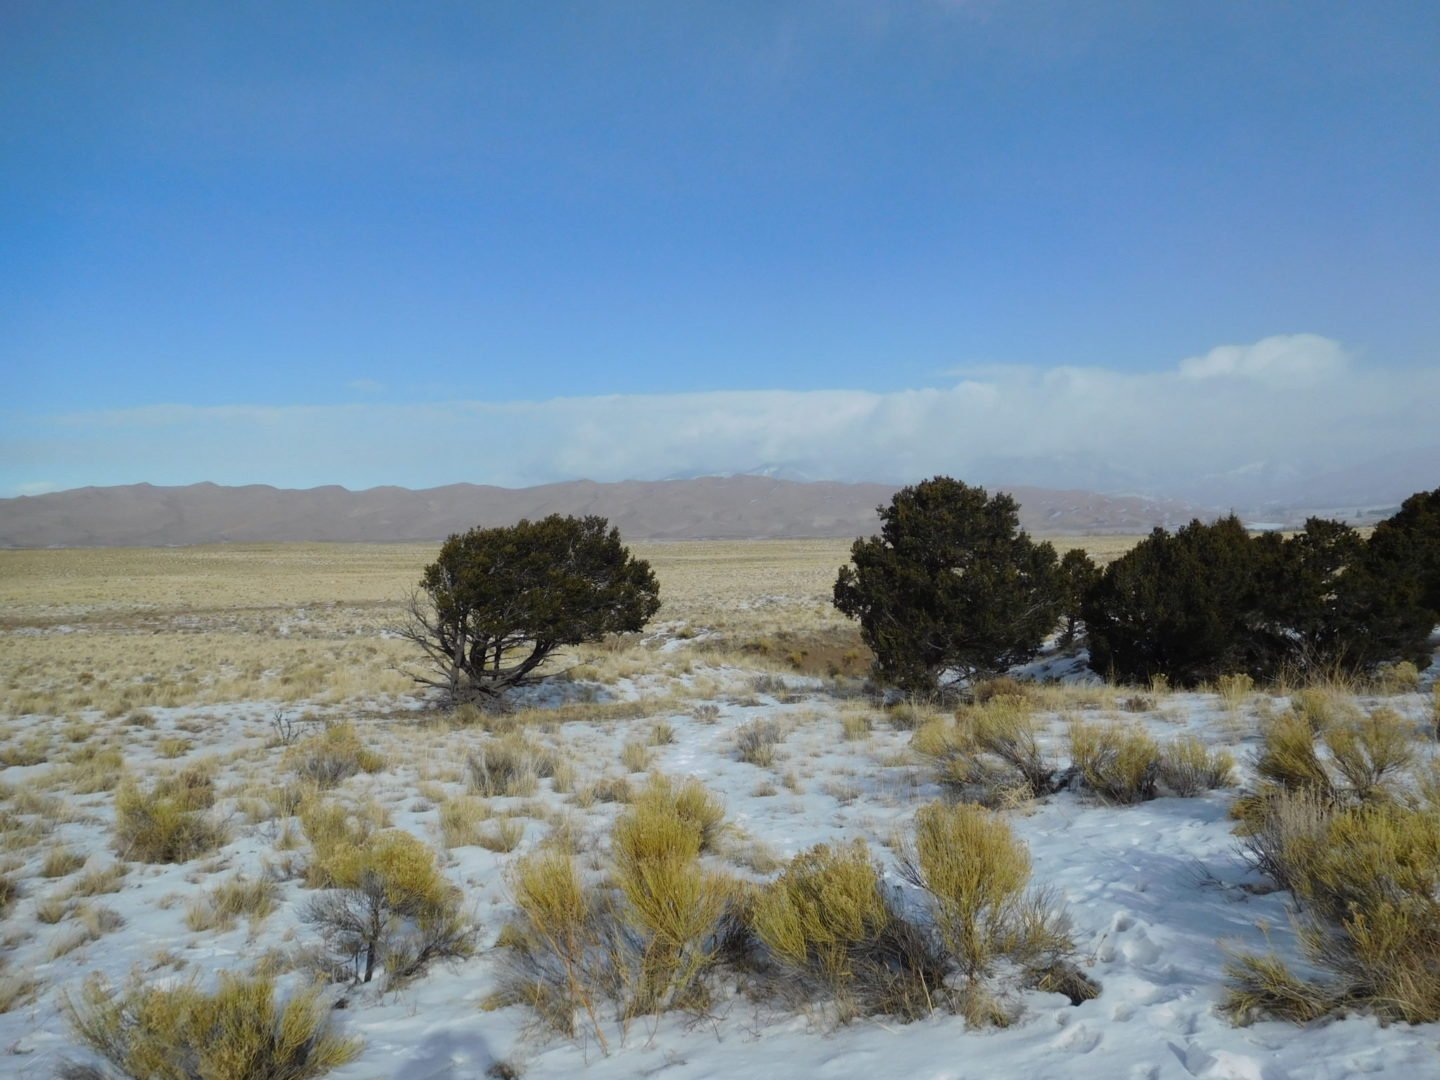 The Great Sand Dunes National Park from a distance